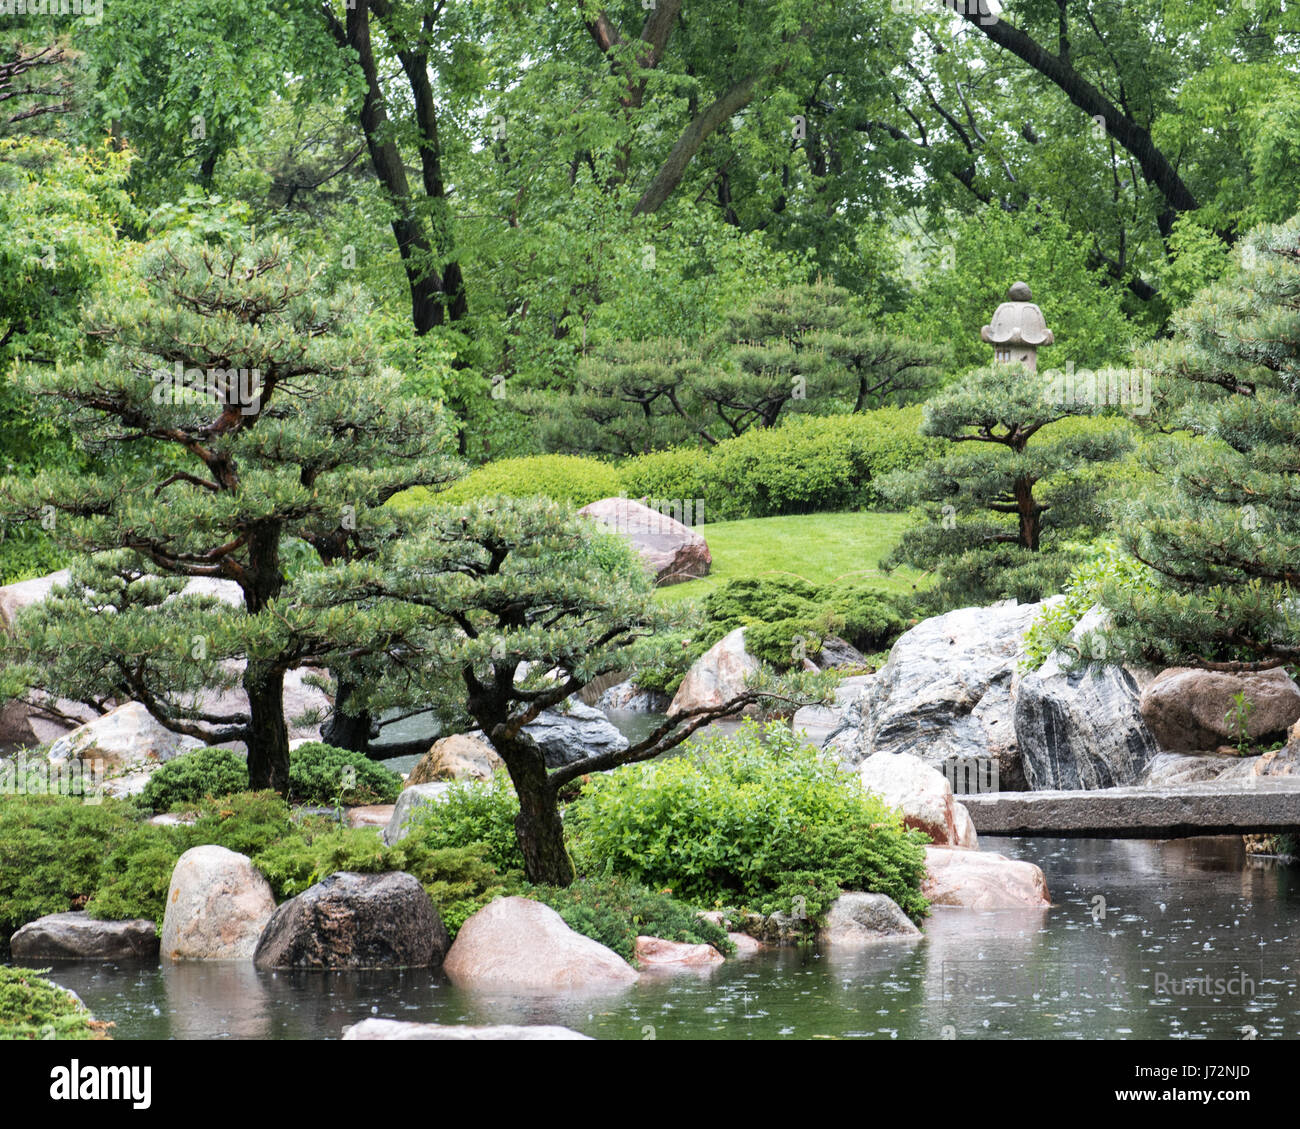 Stone lantern and pond in the rain a Japanese garden Stock Photo